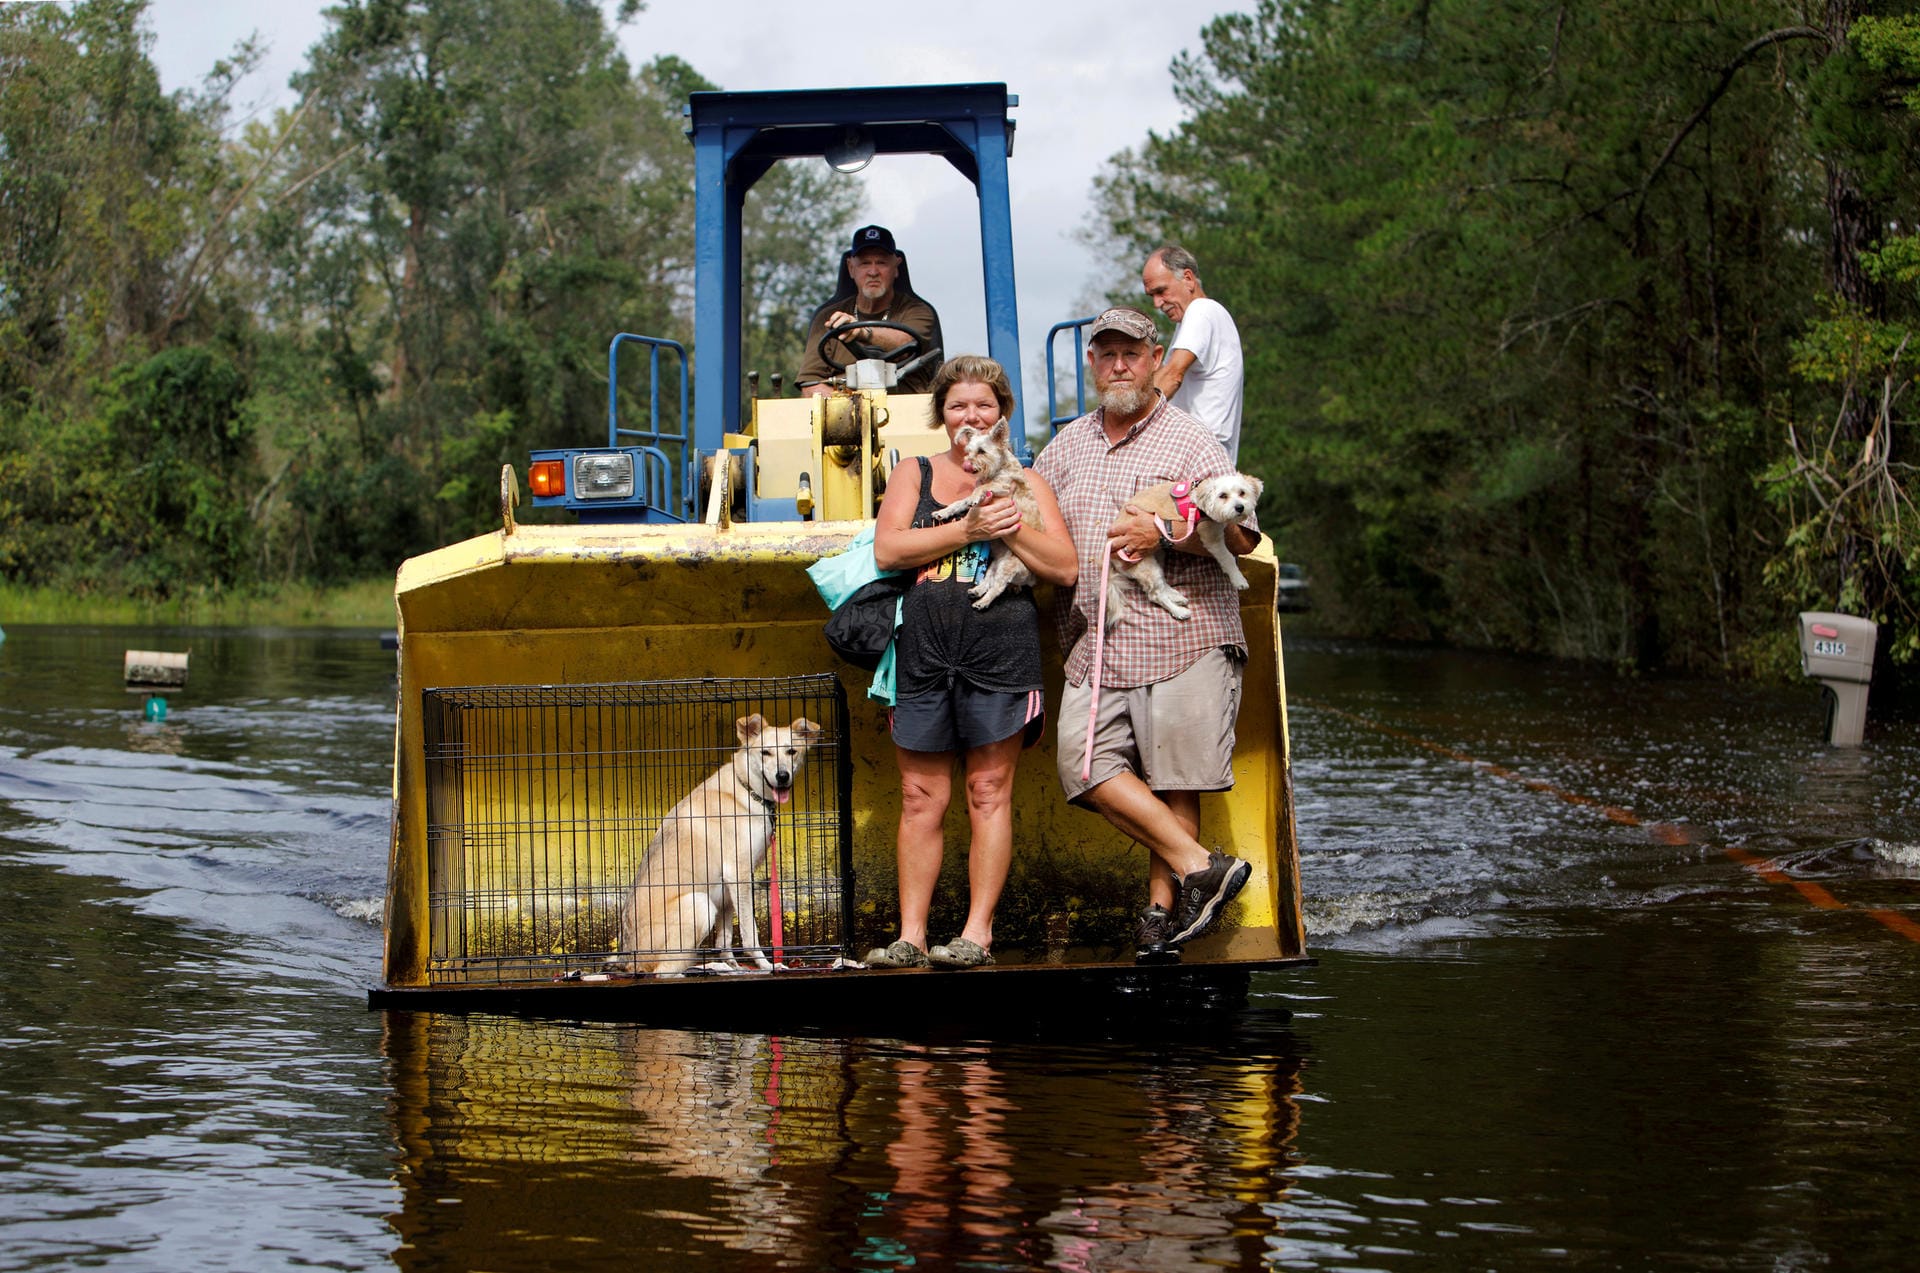 A resident transports evacuees and their pets in the bucket of his tractor as the Northeast Cape Fear River breaks its banks during flooding after Hurricane Florence in Burgaw, North Carolina